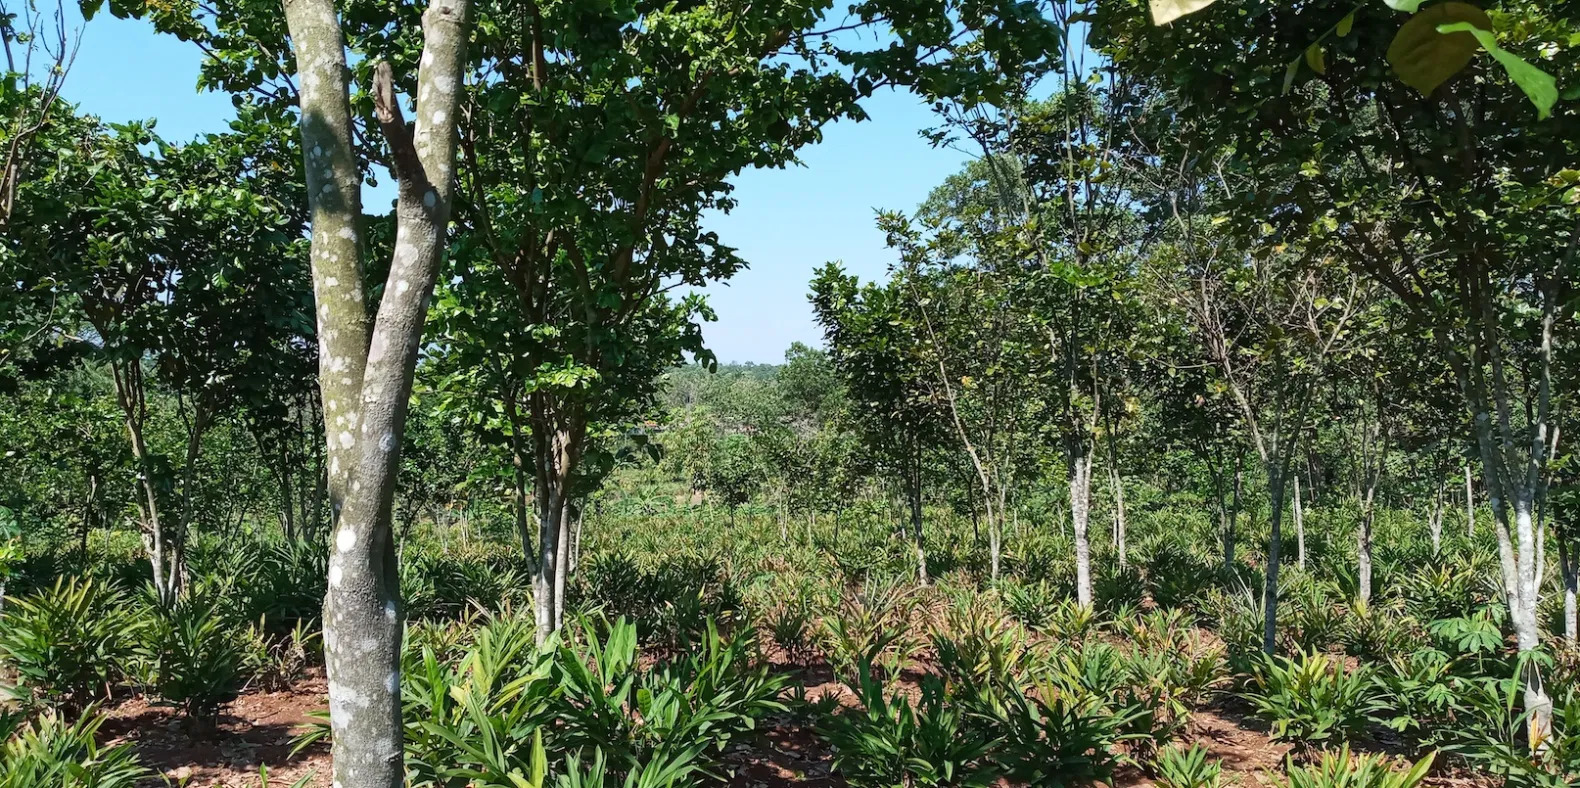 mixed with Alpinia galanga and honey bee husbandry in the FORDIA Research Forest in Parungpanjang, Bogor Regency, Indonesia.